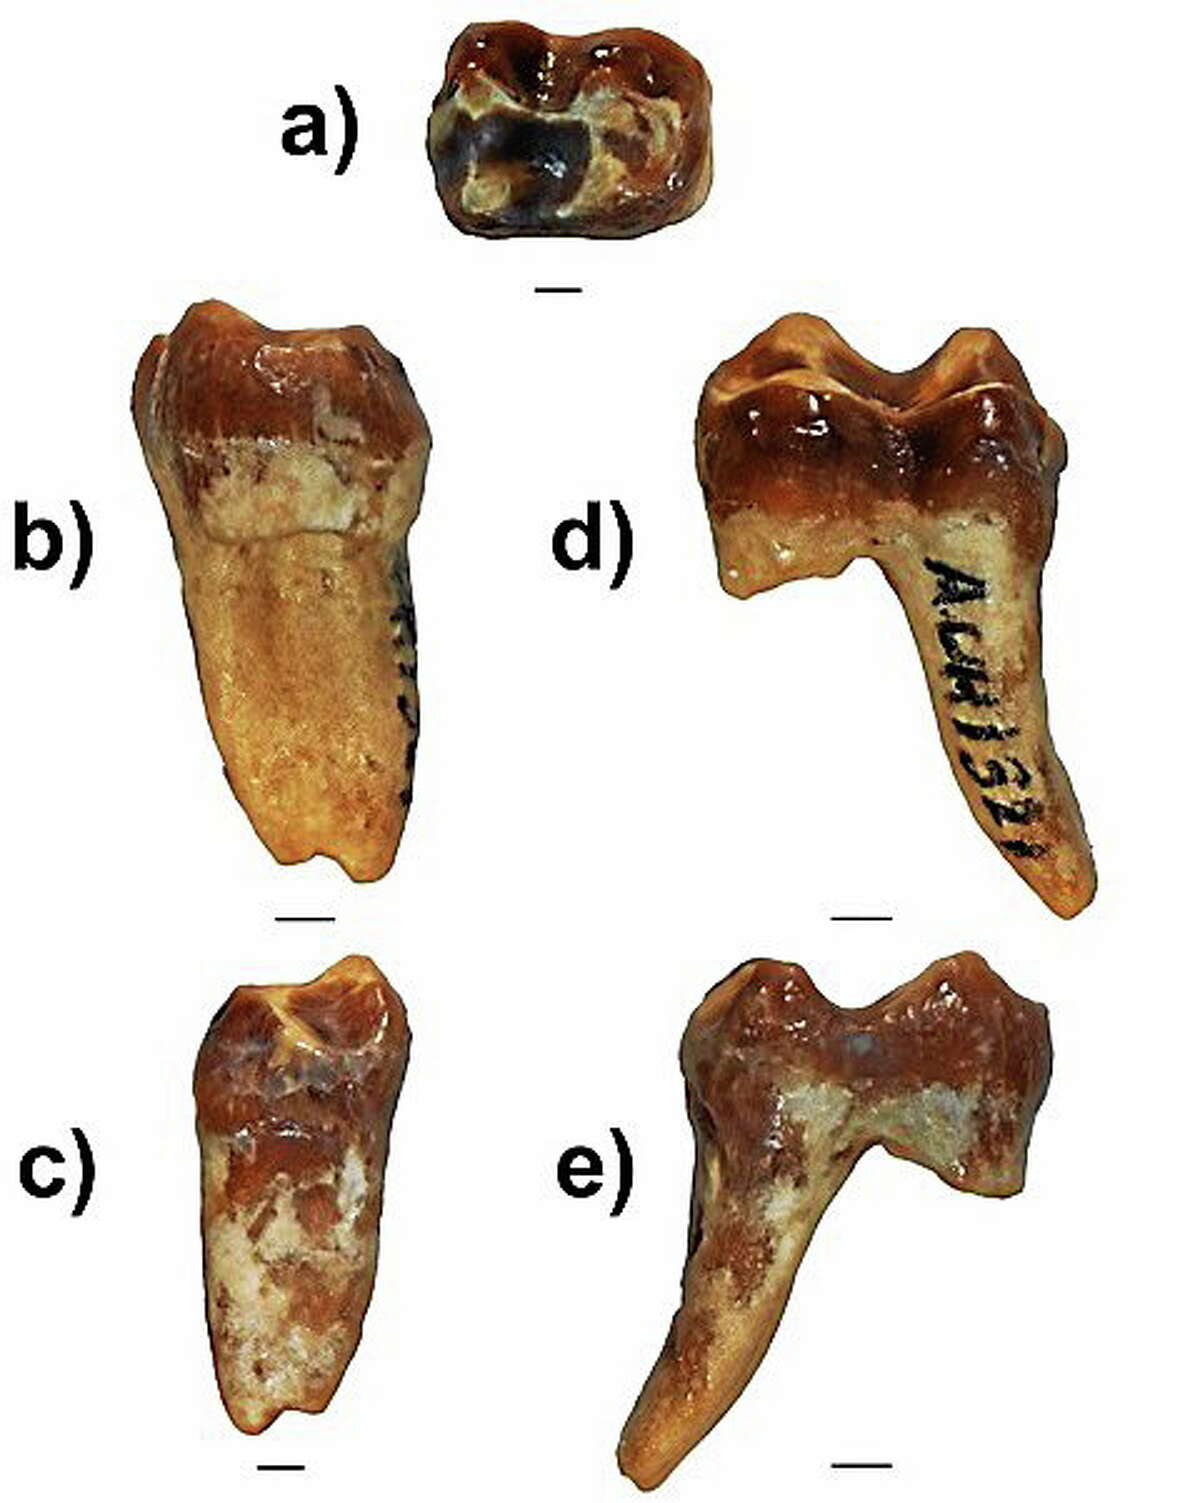 Views of a guenon monkey tooth found in 2009 in Abu Dhabi by Yale professor Andrew Hill and his team of anthropologists. Photo by Eric Lazo-Wasem.